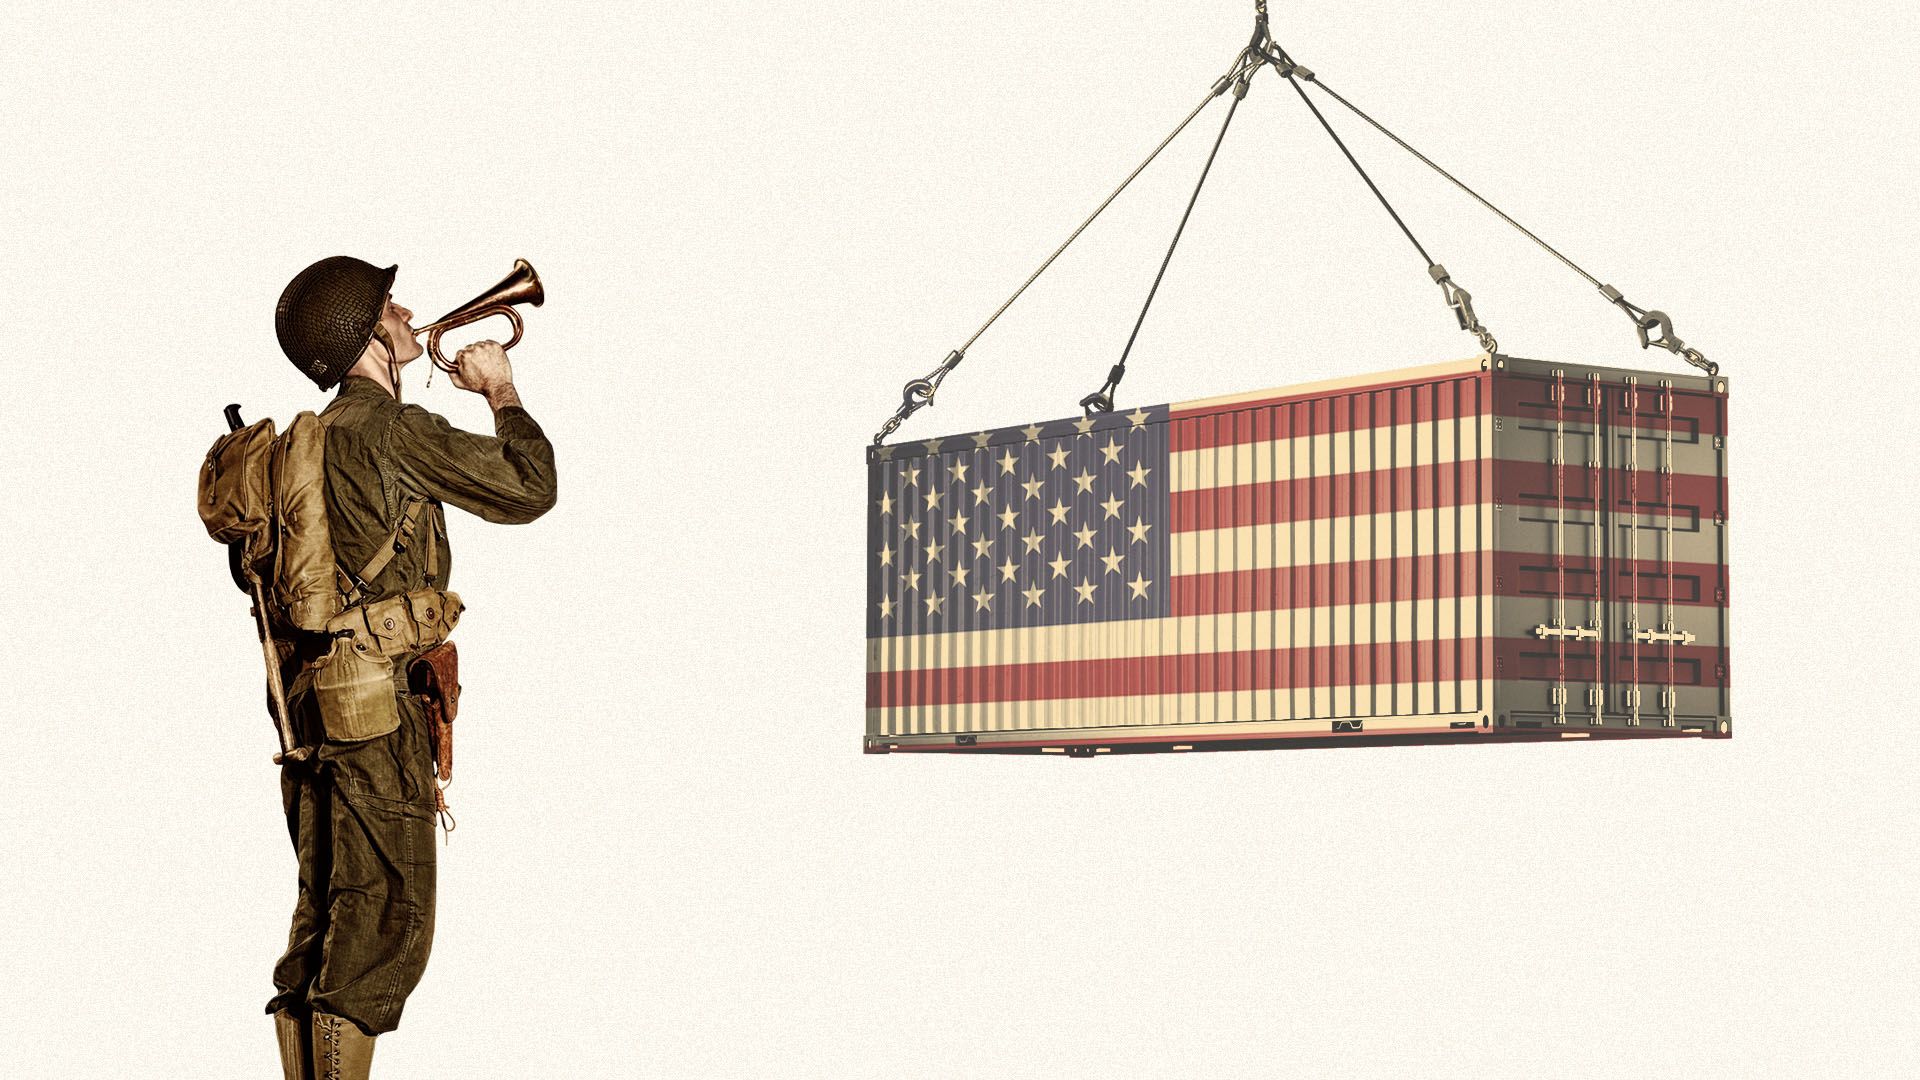 Illustration of a World War II soldier playing taps to an American flag shipping container